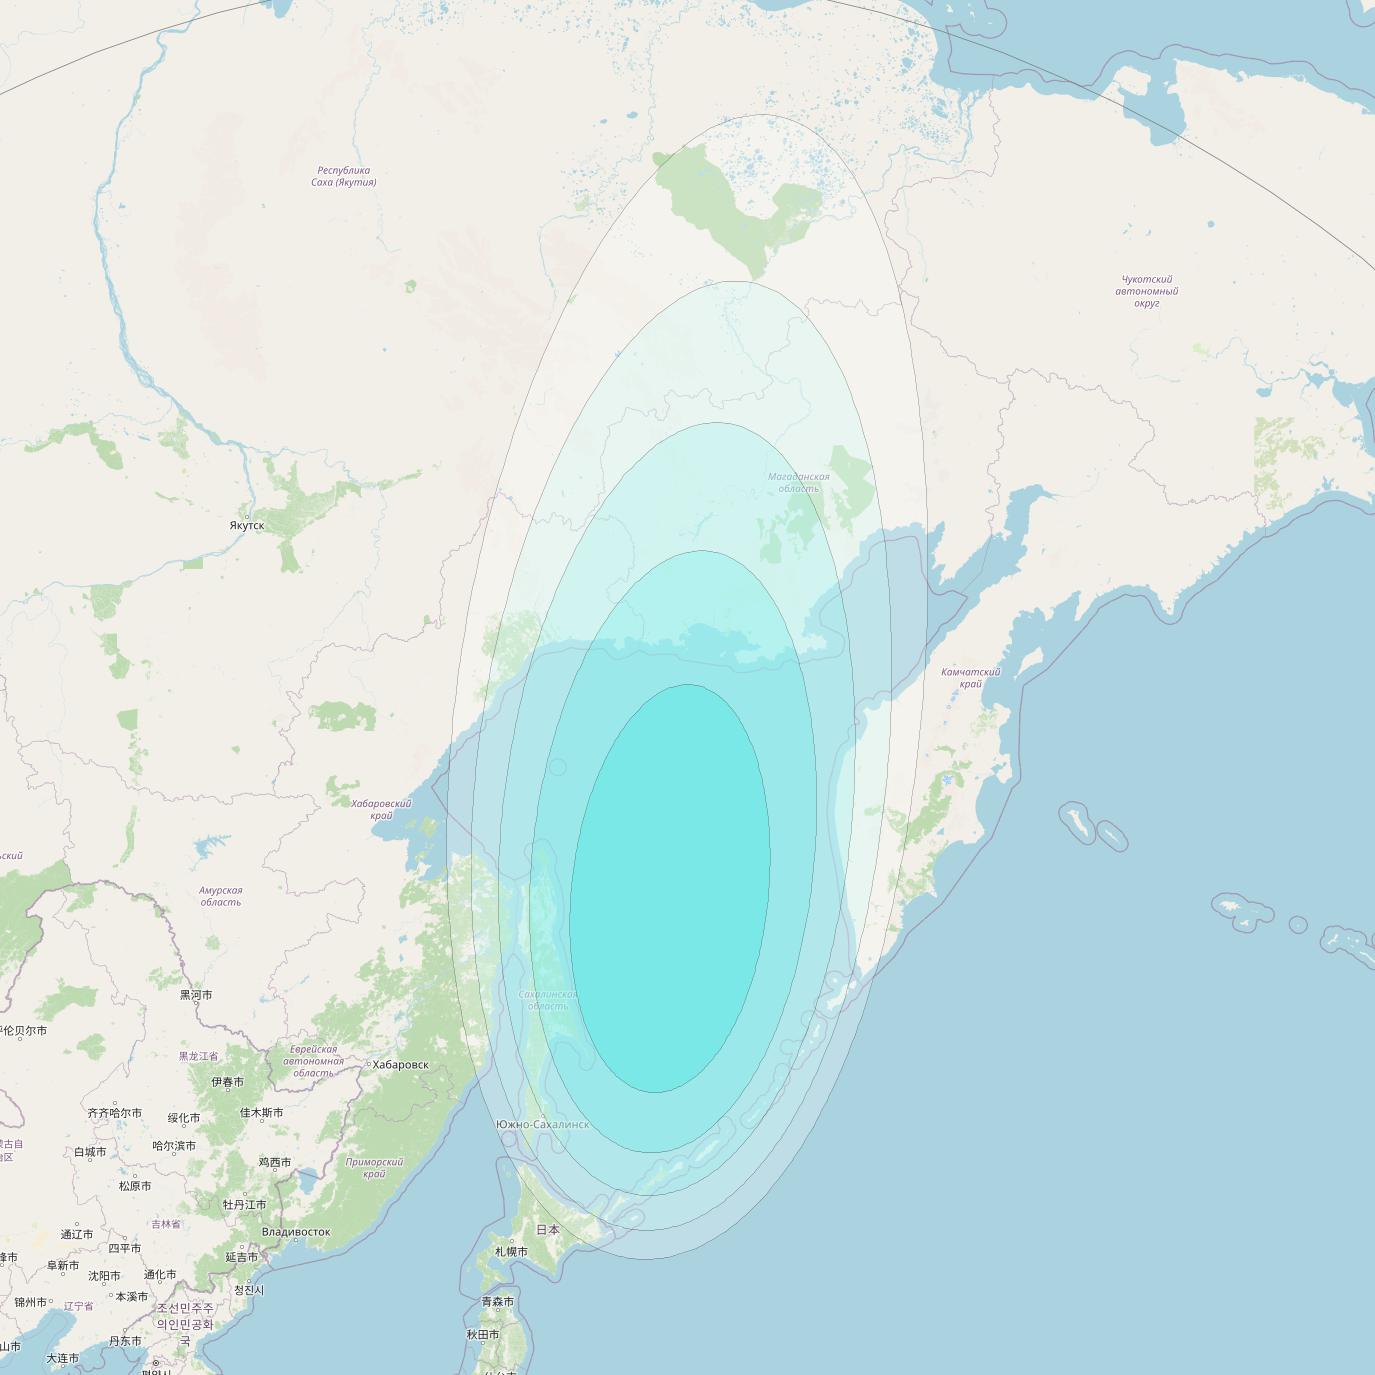 Inmarsat-4F1 at 143° E downlink L-band S110 User Spot beam coverage map